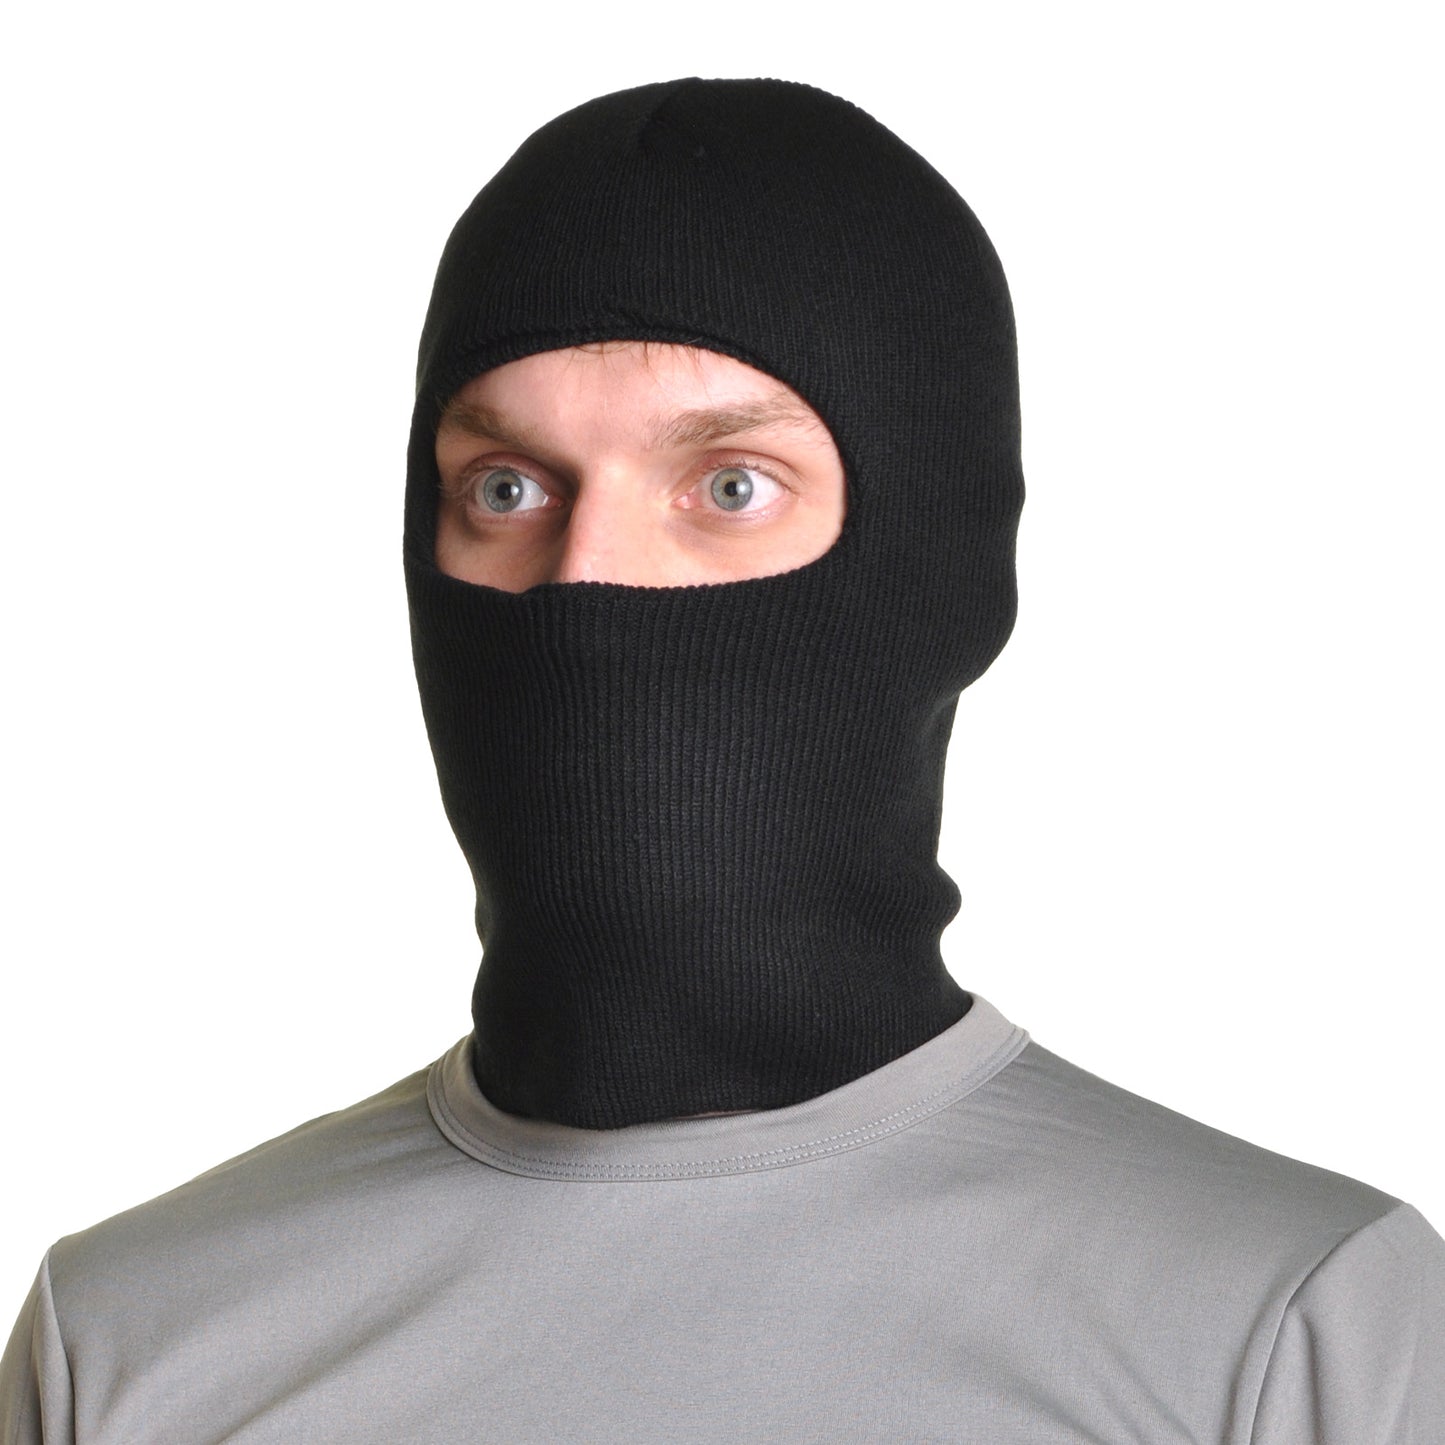 Swan Winter Warmth Black Knitted Balaclava 1 Hole Ski Mask (6-Pack), #WH2042